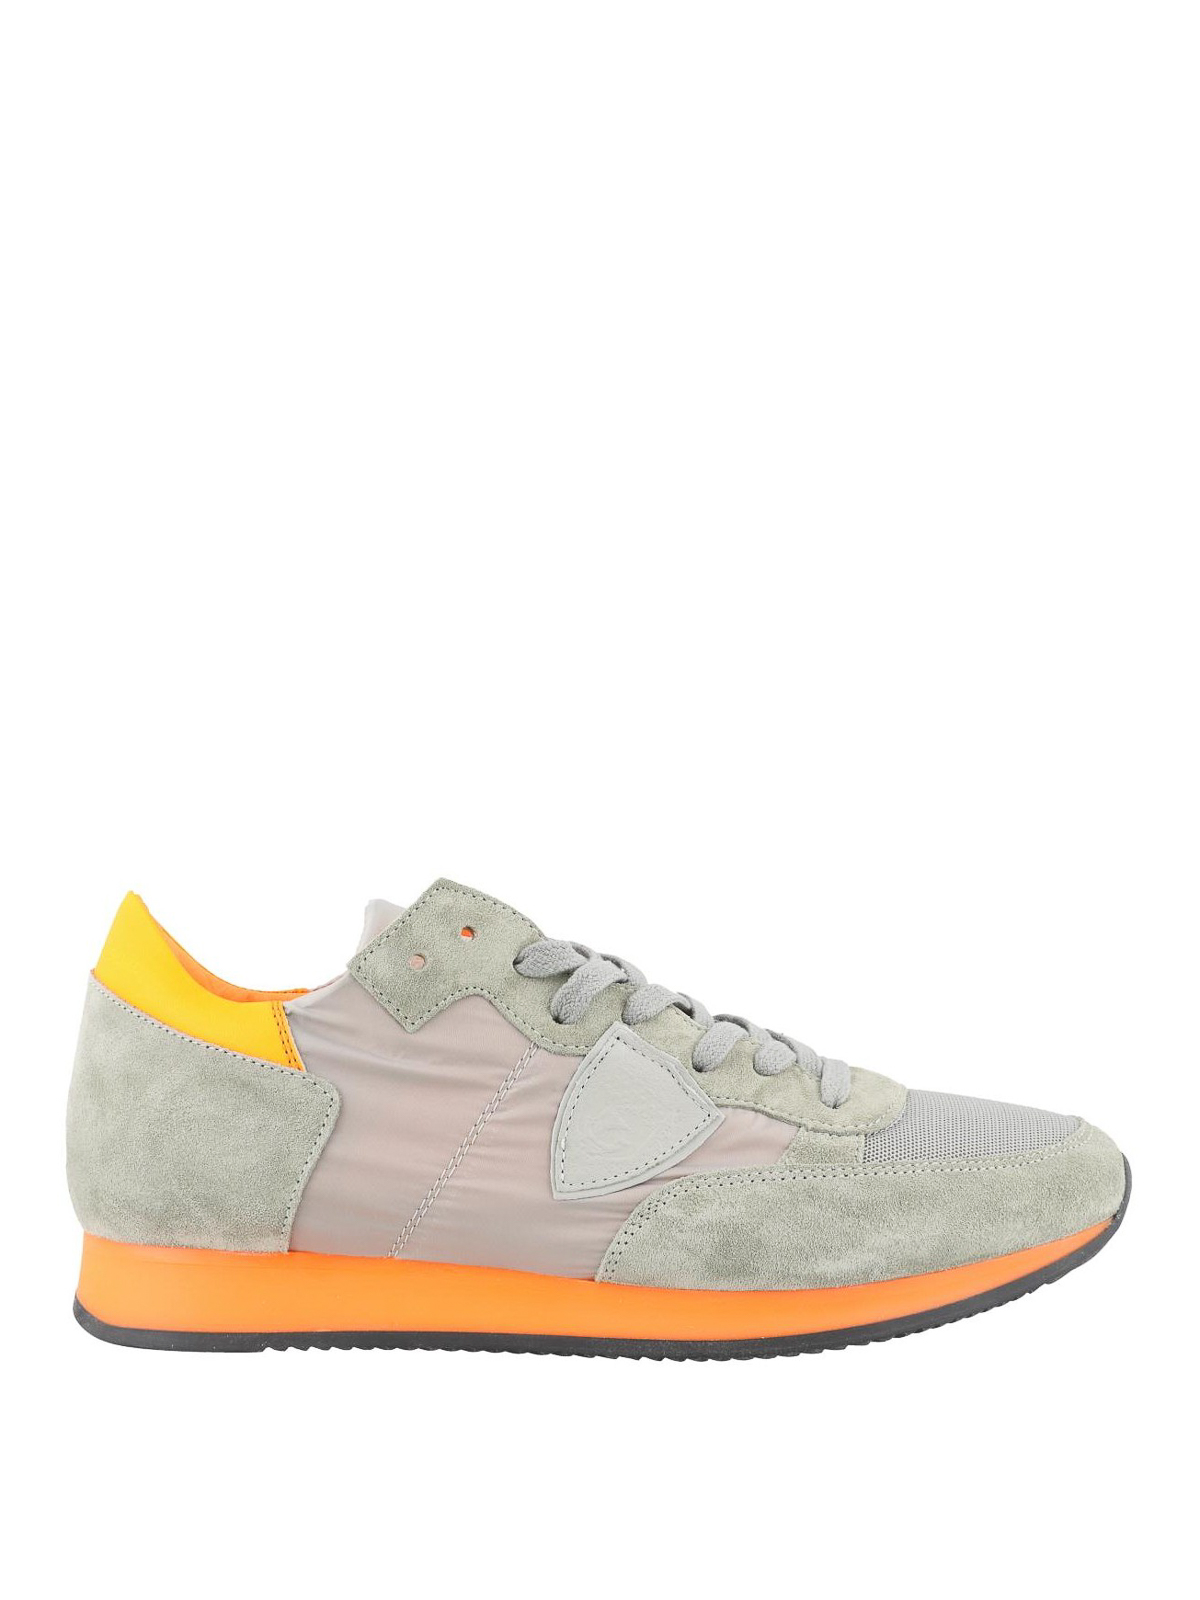 Trainers Philippe Model - Tropez Neon grey and orange sneakers - TRLUNF06